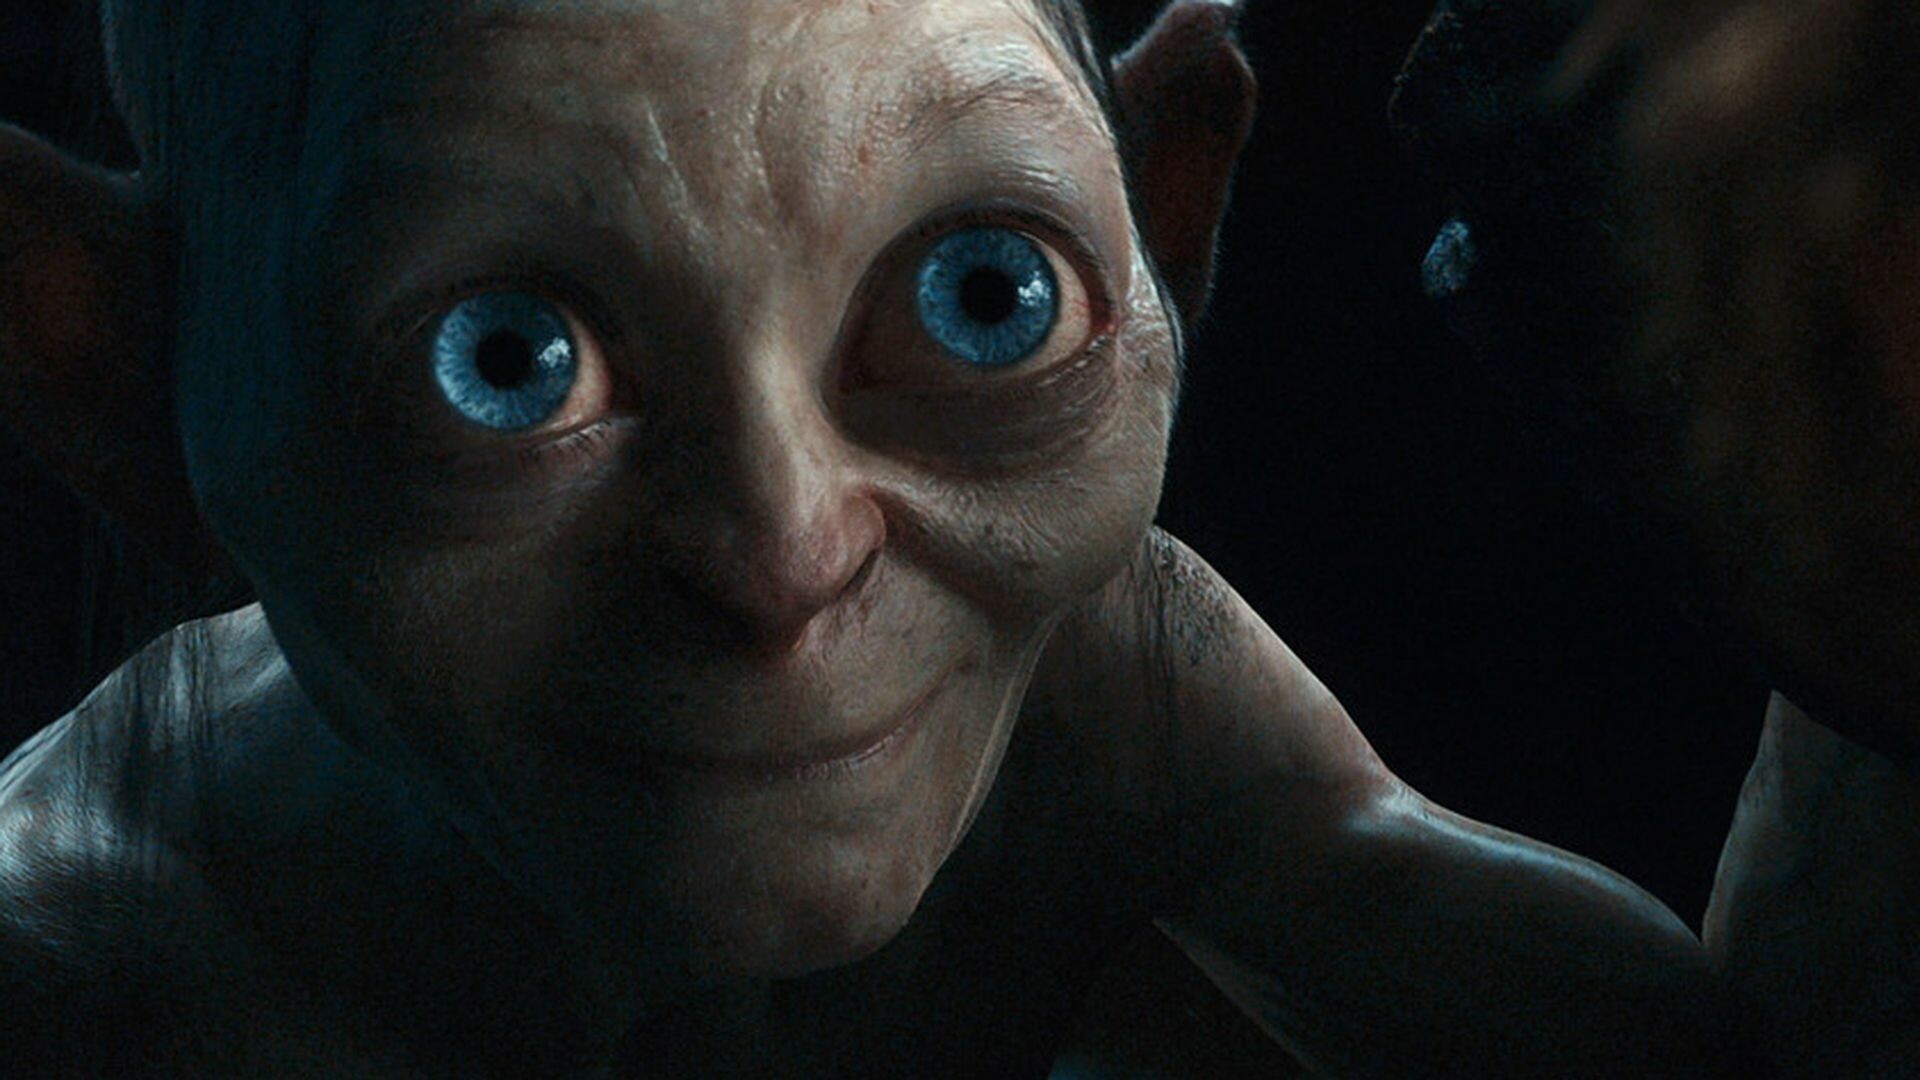 Smeagol wallpapers, Memorable character backgrounds, Lord of the Rings imagery, Middle-earth, 1920x1080 Full HD Desktop